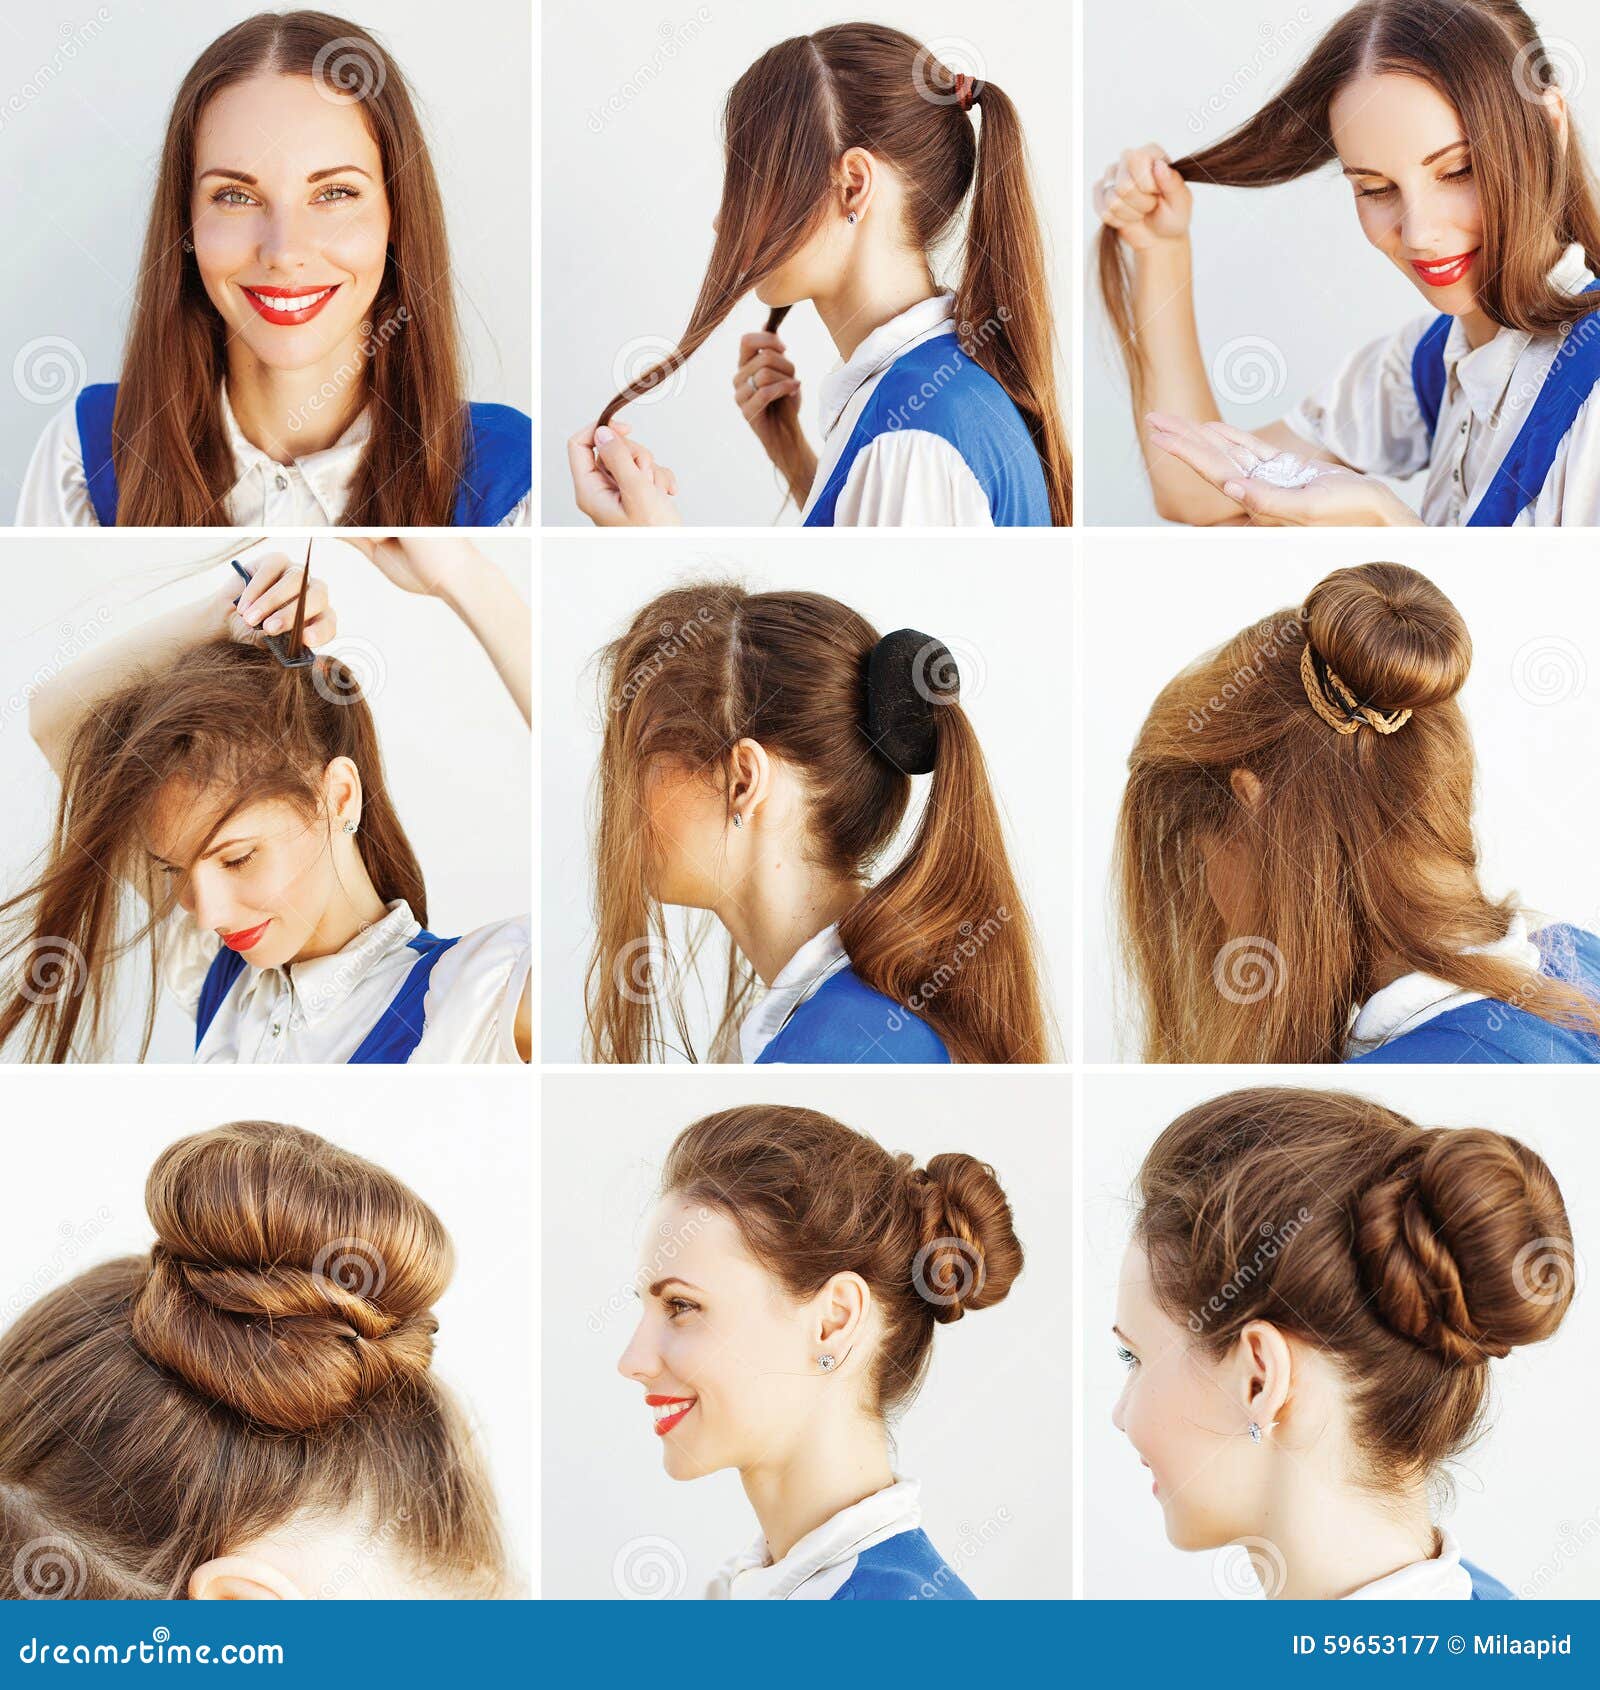 Step by Step Hairstyle Idea for Blog Stock Image - Image of bride, medium:  59653177